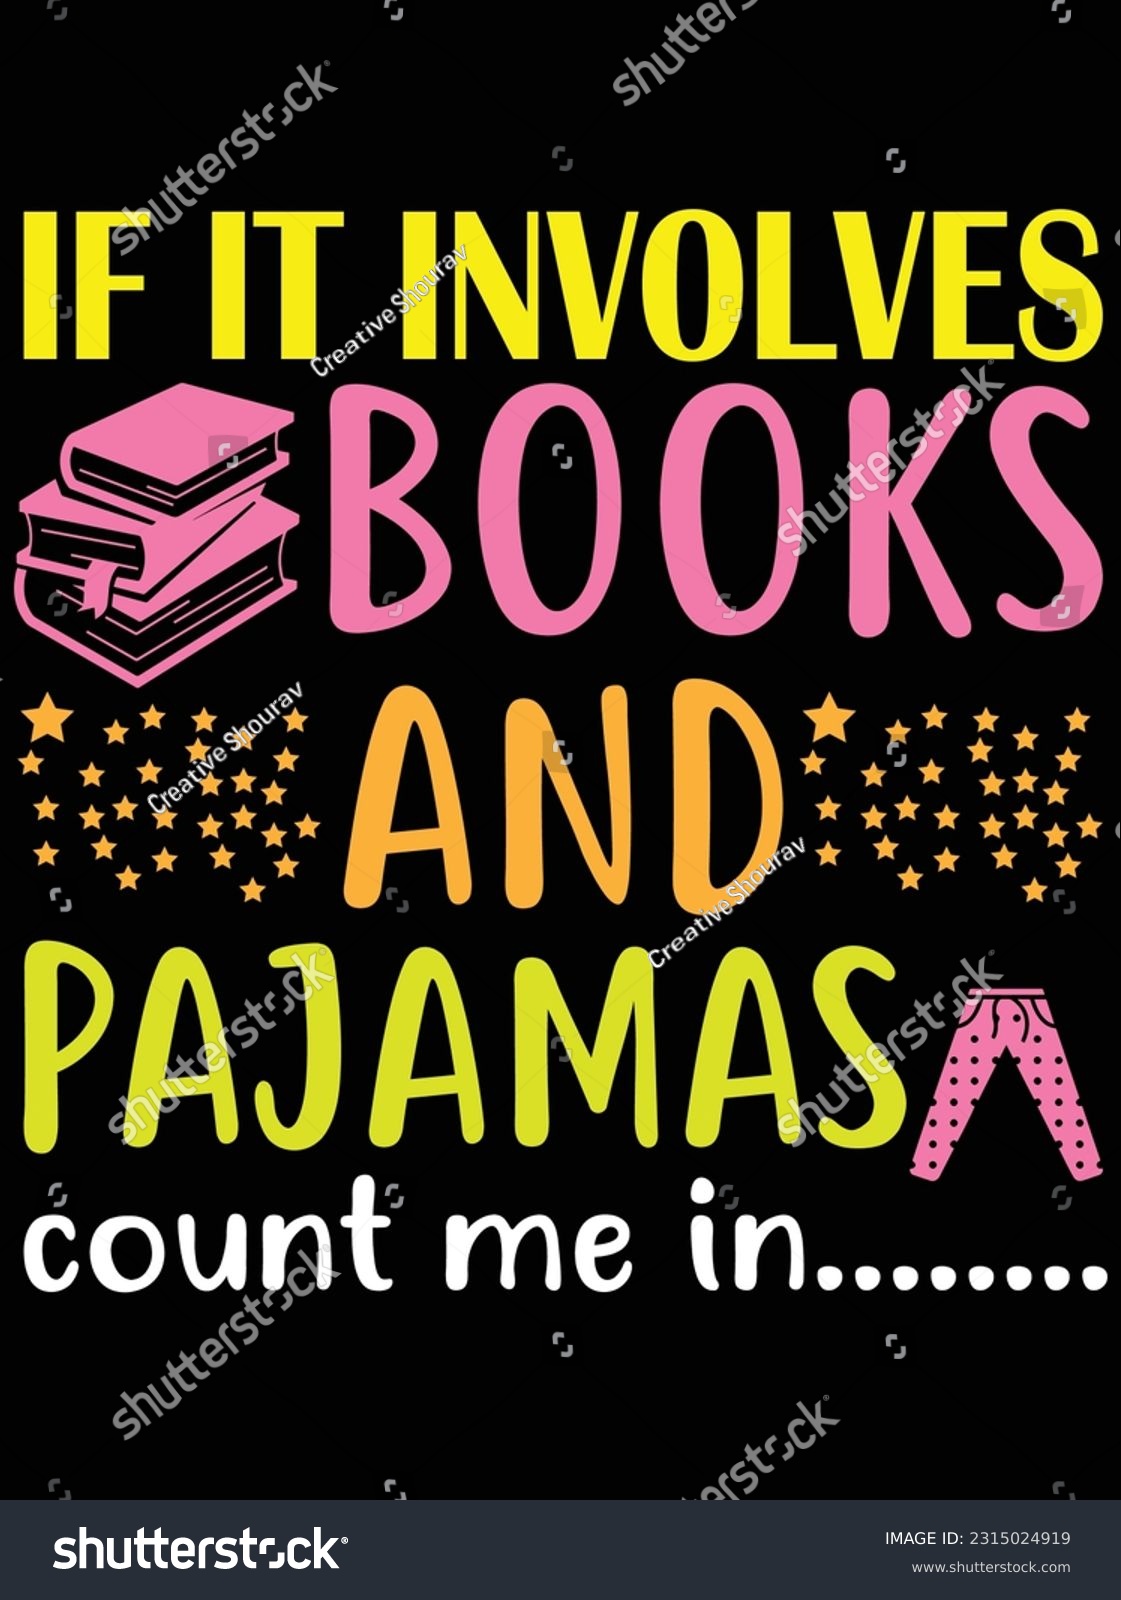 SVG of If it involves books and pajamas count me in vector art design, eps file. design file for t-shirt. SVG, EPS cuttable design file svg